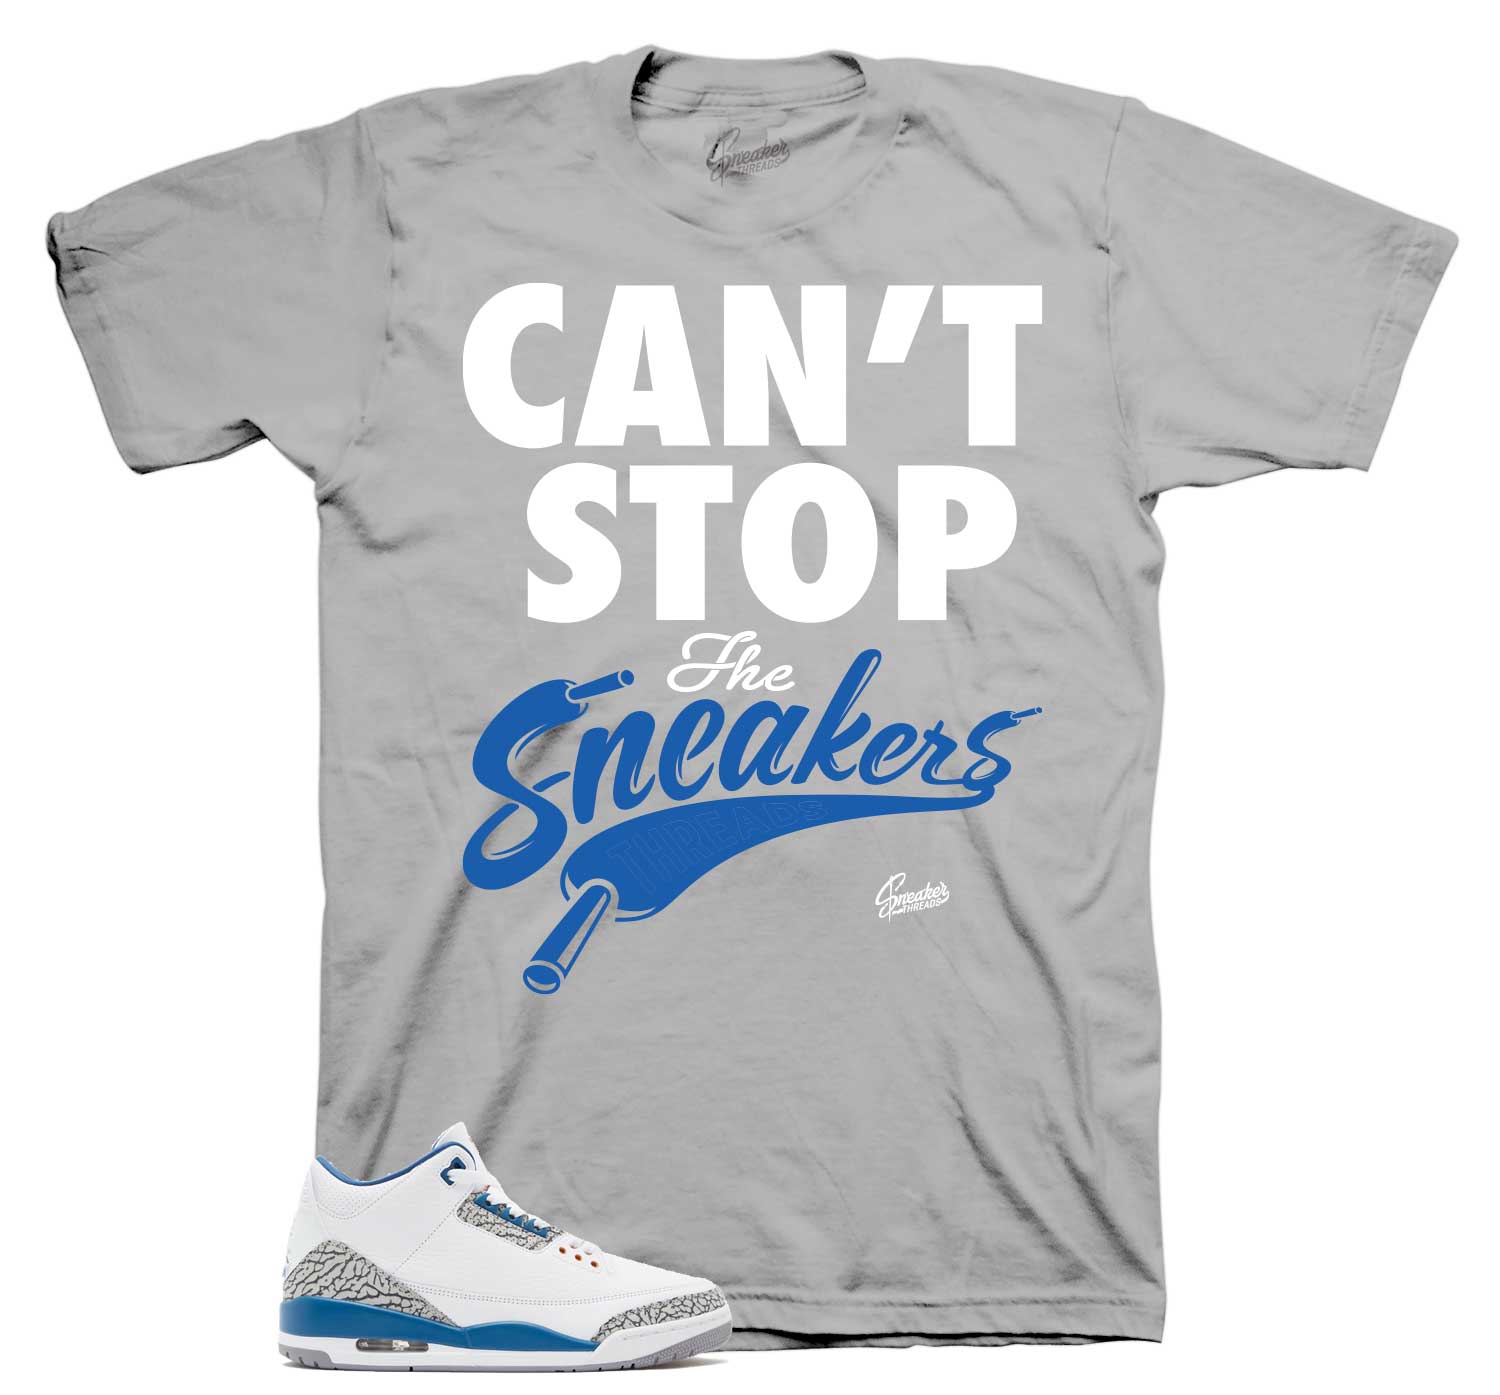 Retro 3 Wizards Shirt - Can't Stop - Grey